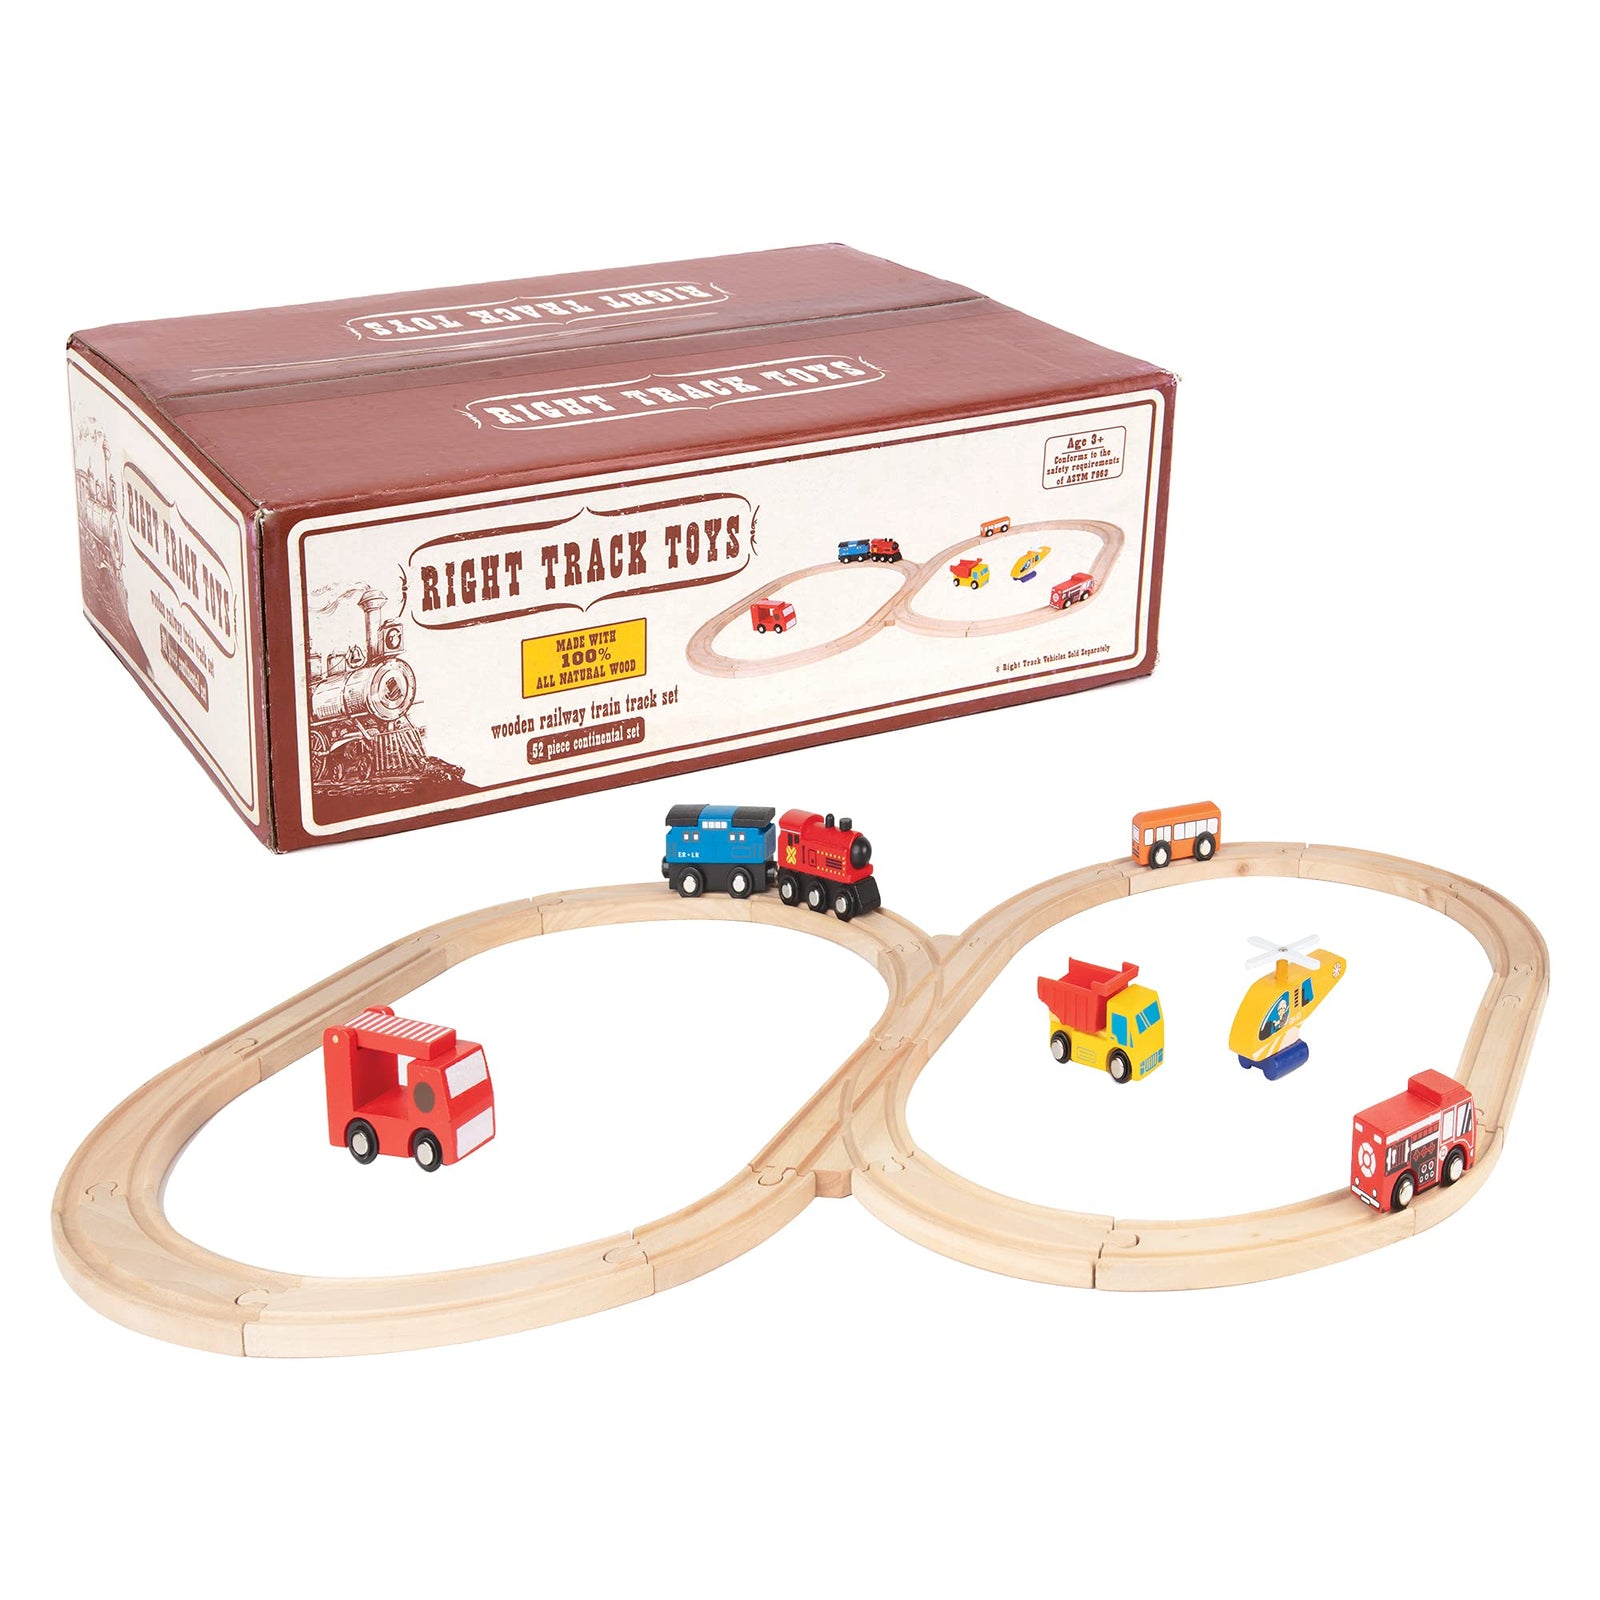 Wooden Train Track 52 Piece Set - 18 Feet Of Track Expansion And 5 Distinct Pieces - 100% Compatible with All Major Brands Including Thomas Wooden Railway System - by Right Track Toys